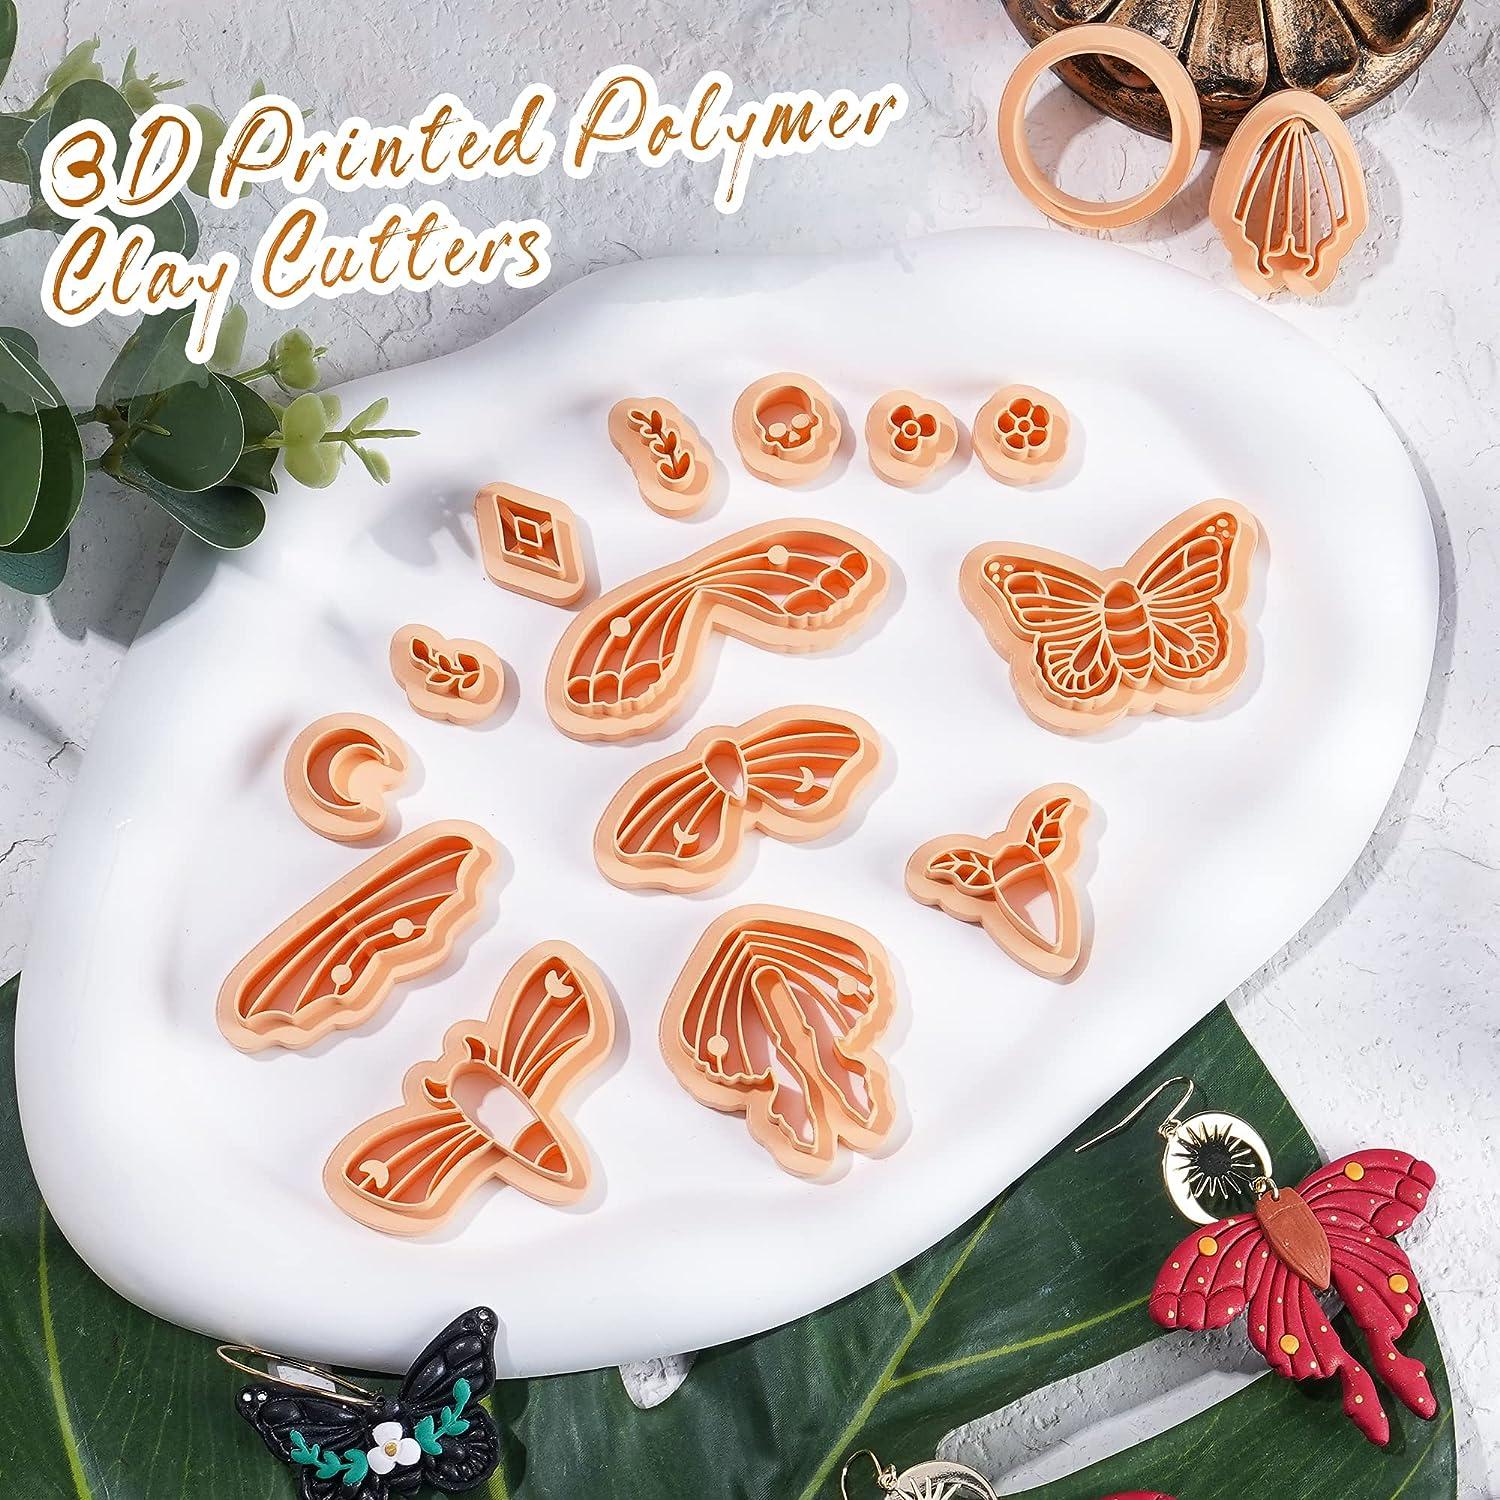 Puocaon Luna Moth Polymer Clay Cutters - 16 Shapes Clay Cutters